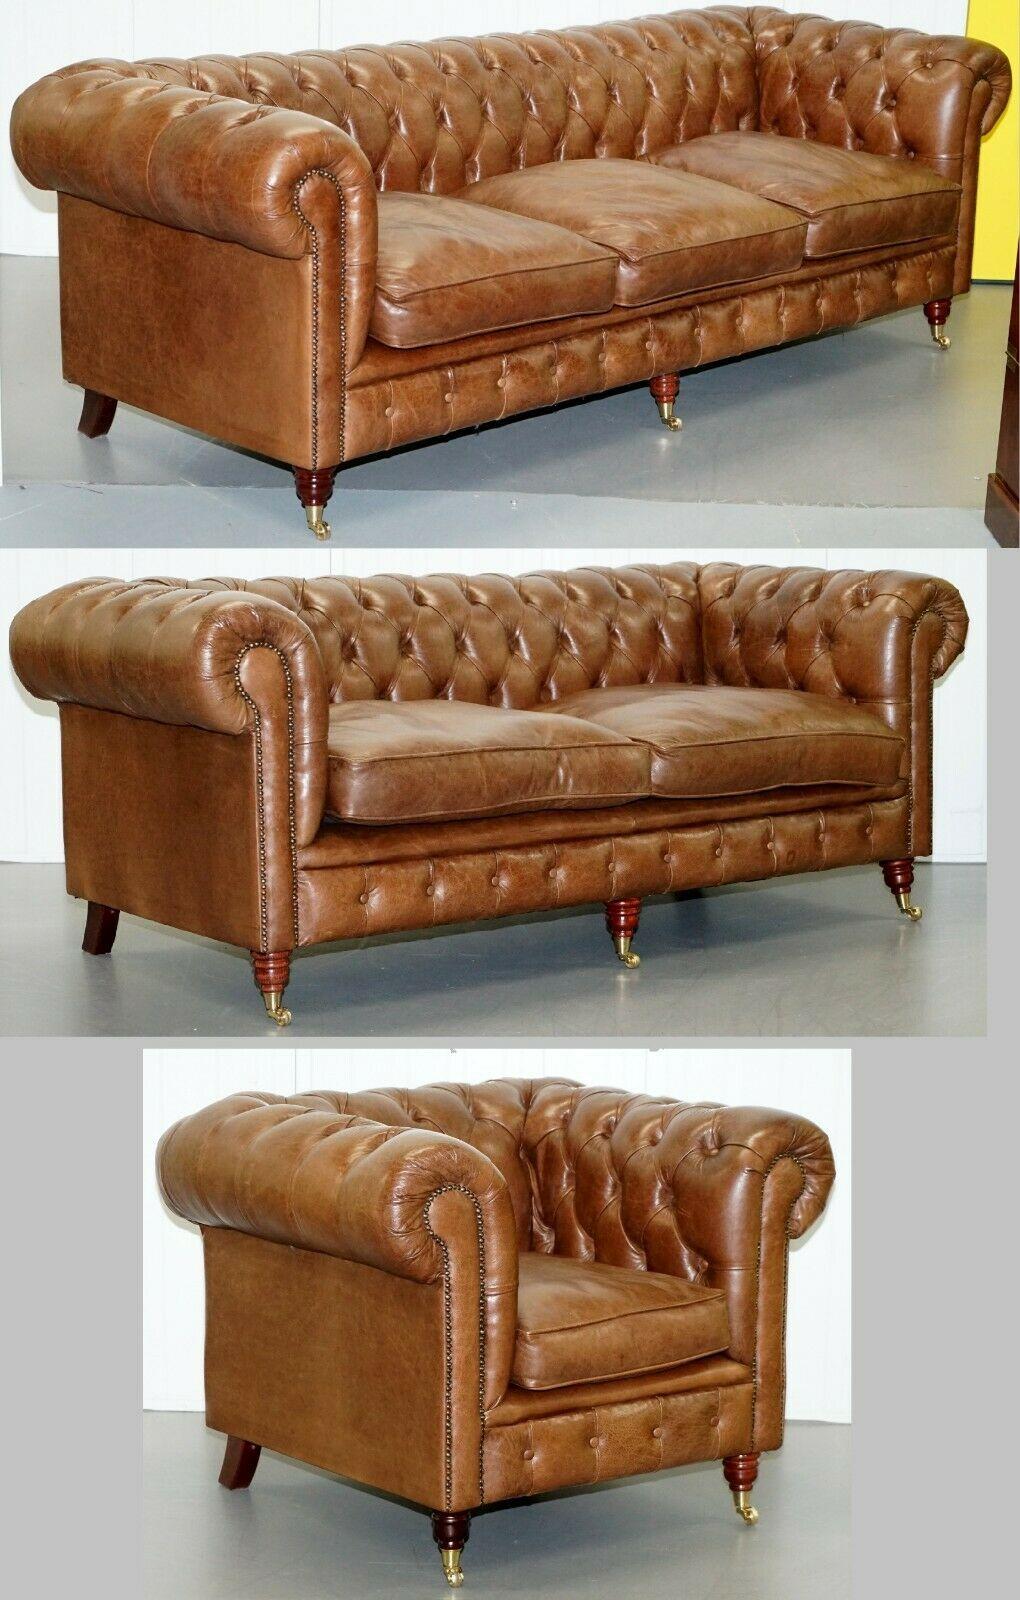 Hand-Crafted Chesterfield Tufted Heritage Brown Leather Three-Seat Sofa Part of a Large Suite